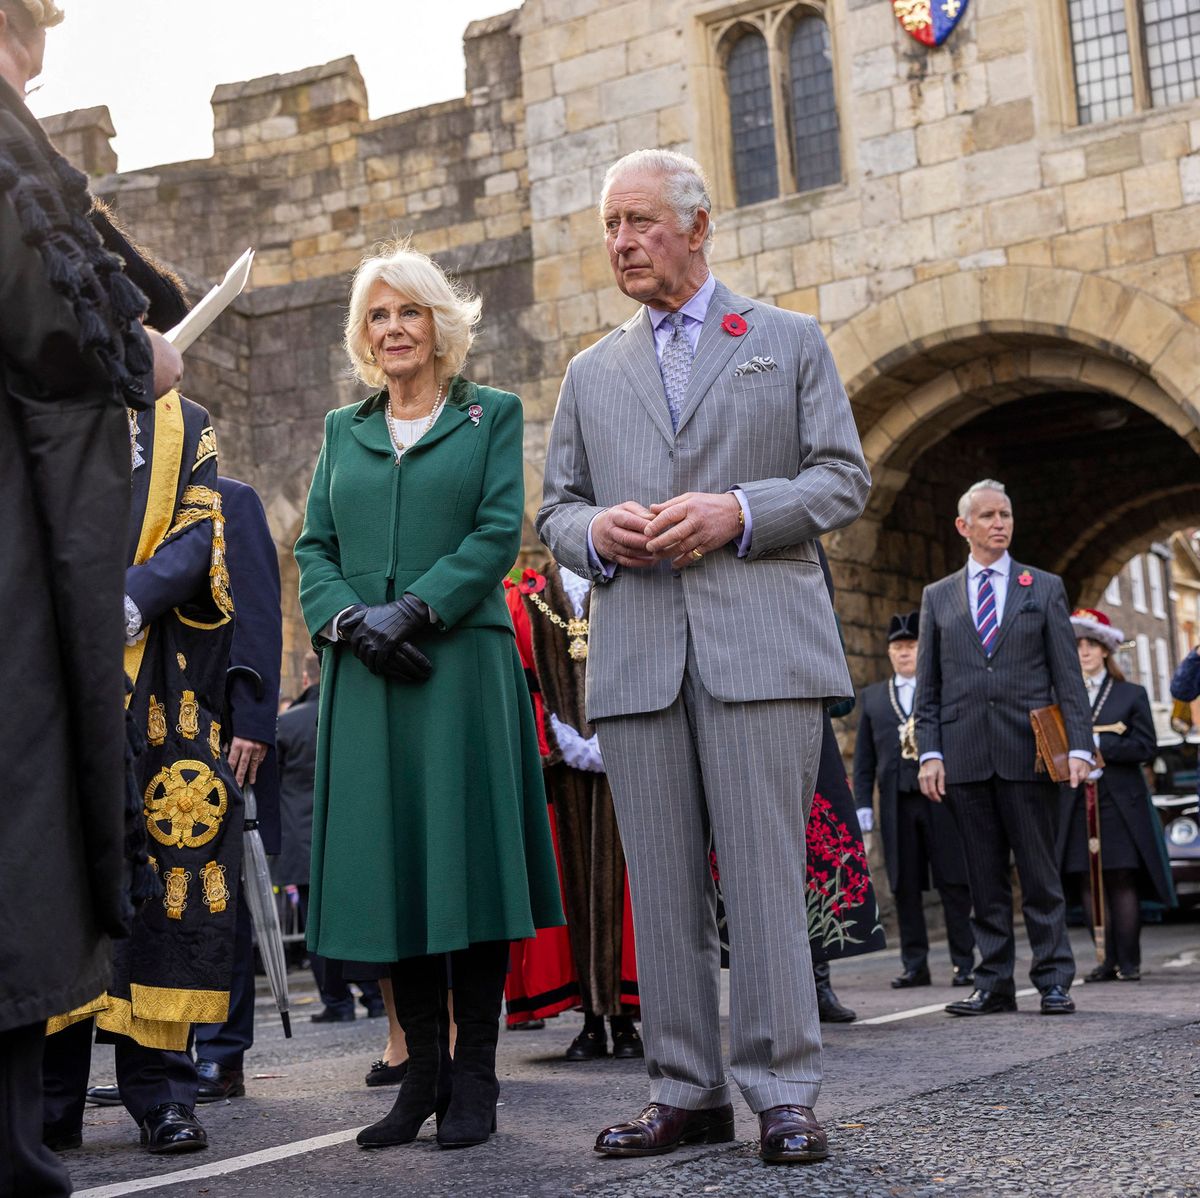 britains king charles iii and britains camilla, queen consort are welcomed to the city of york during a ceremony at micklegate bar during their visit to york, northern england on november 9, 2022 as part of a two day tour of yorkshire   micklegate bar is considered to be the most important of yorks gateways and has acted as the focus for various important events it is the place the sovereign traditionally arrives when entering the city photo by james glossop  pool  afp photo by james glossoppoolafp via getty images